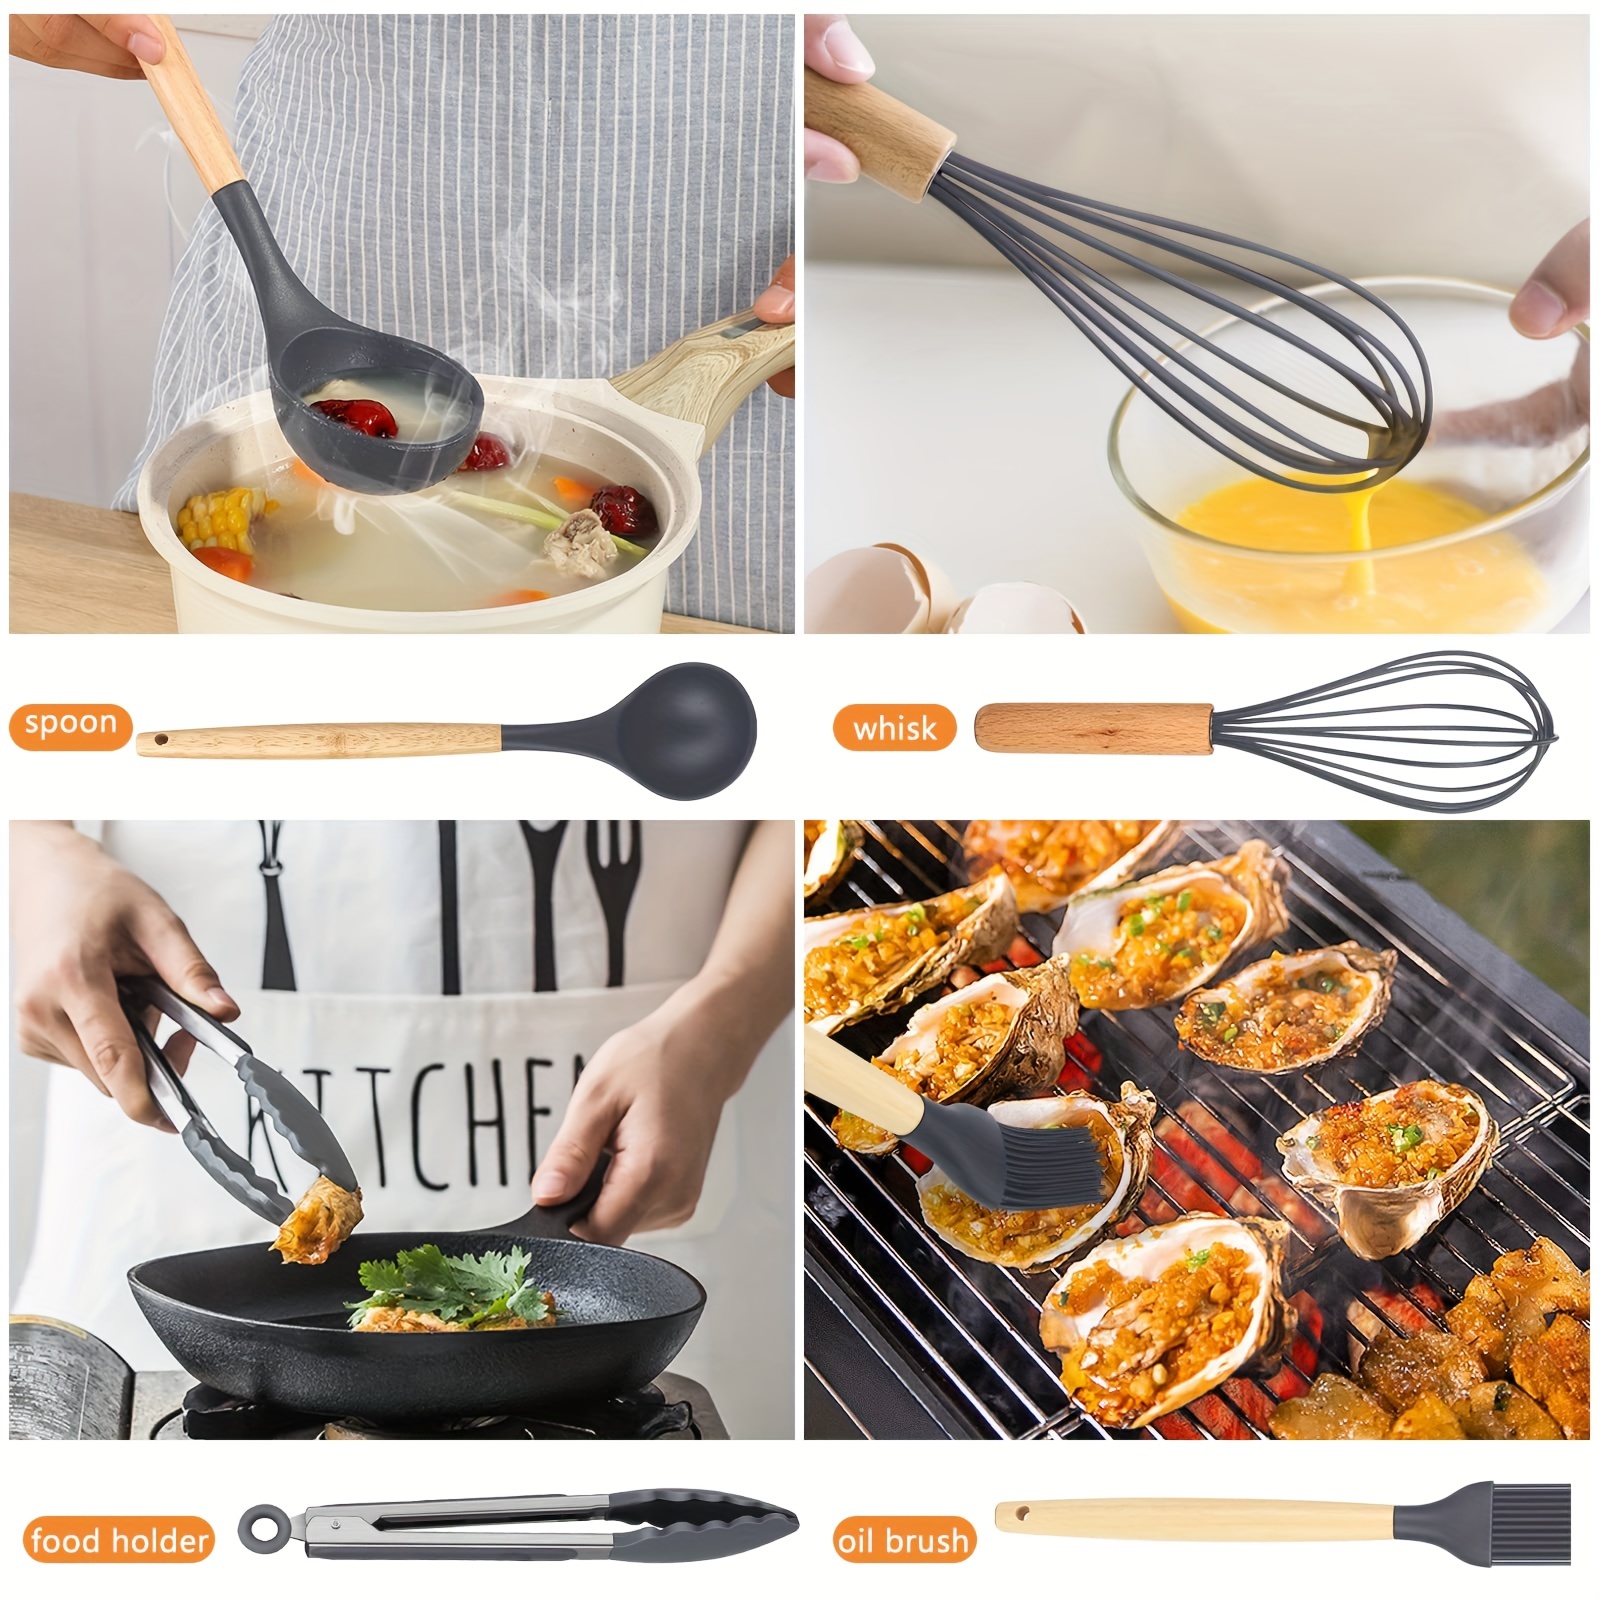 Heat Resistant Cooking Utensil Set from Non-stick Silicone